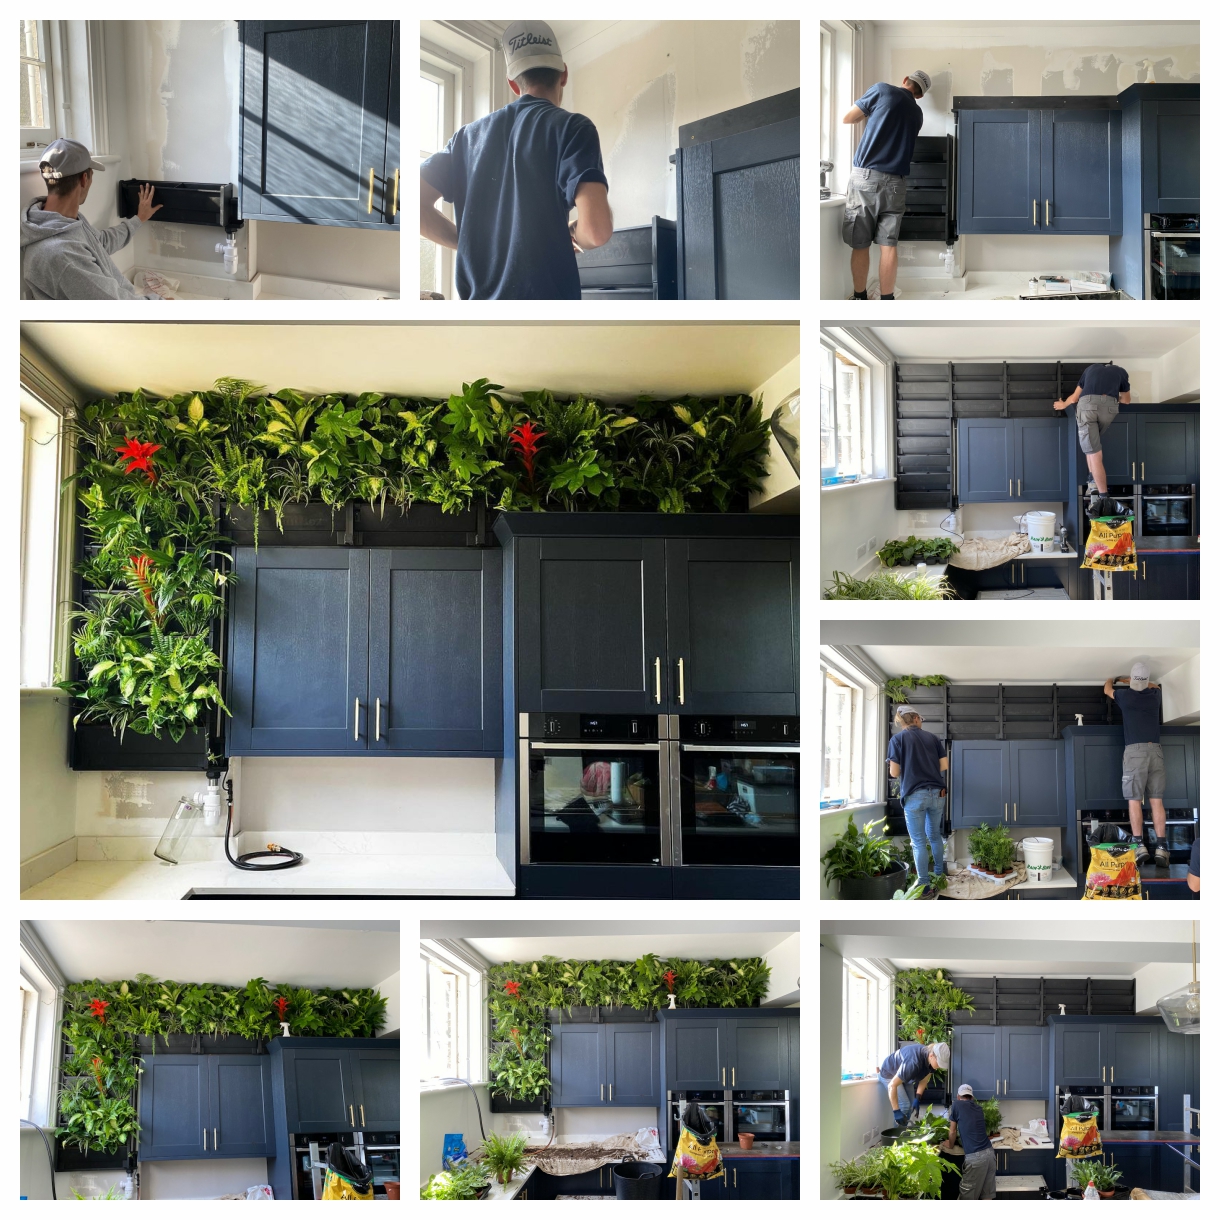 living walls in contemporary kitchen design